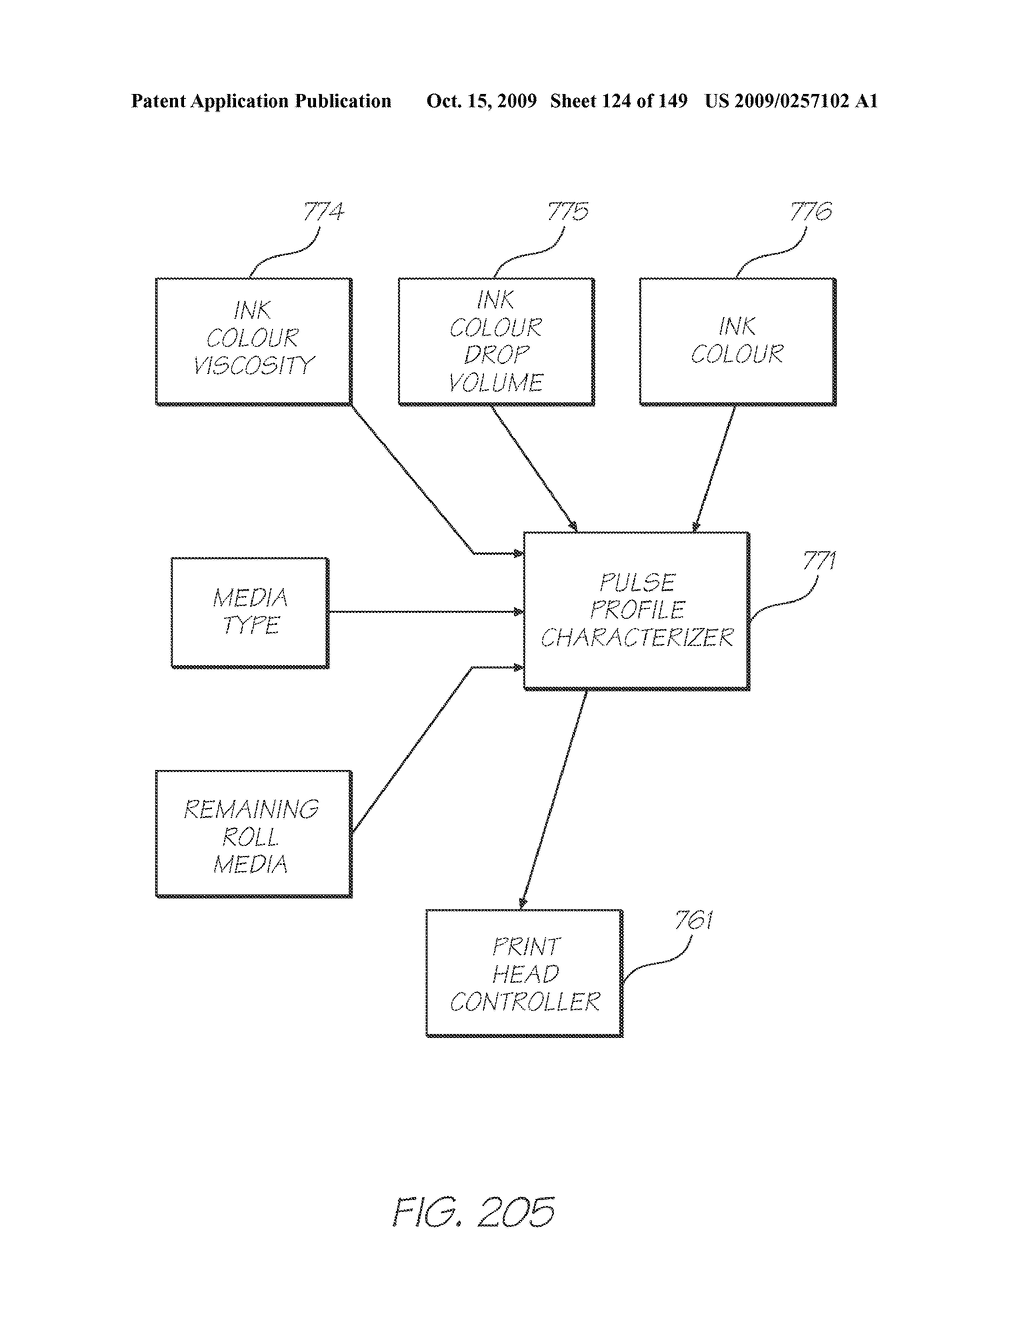 IMAGE PROCESSING APPARATUS HAVING CARD READER FOR APPLYING EFFECTS STORED ON A CARD TO A STORED IMAGE - diagram, schematic, and image 125